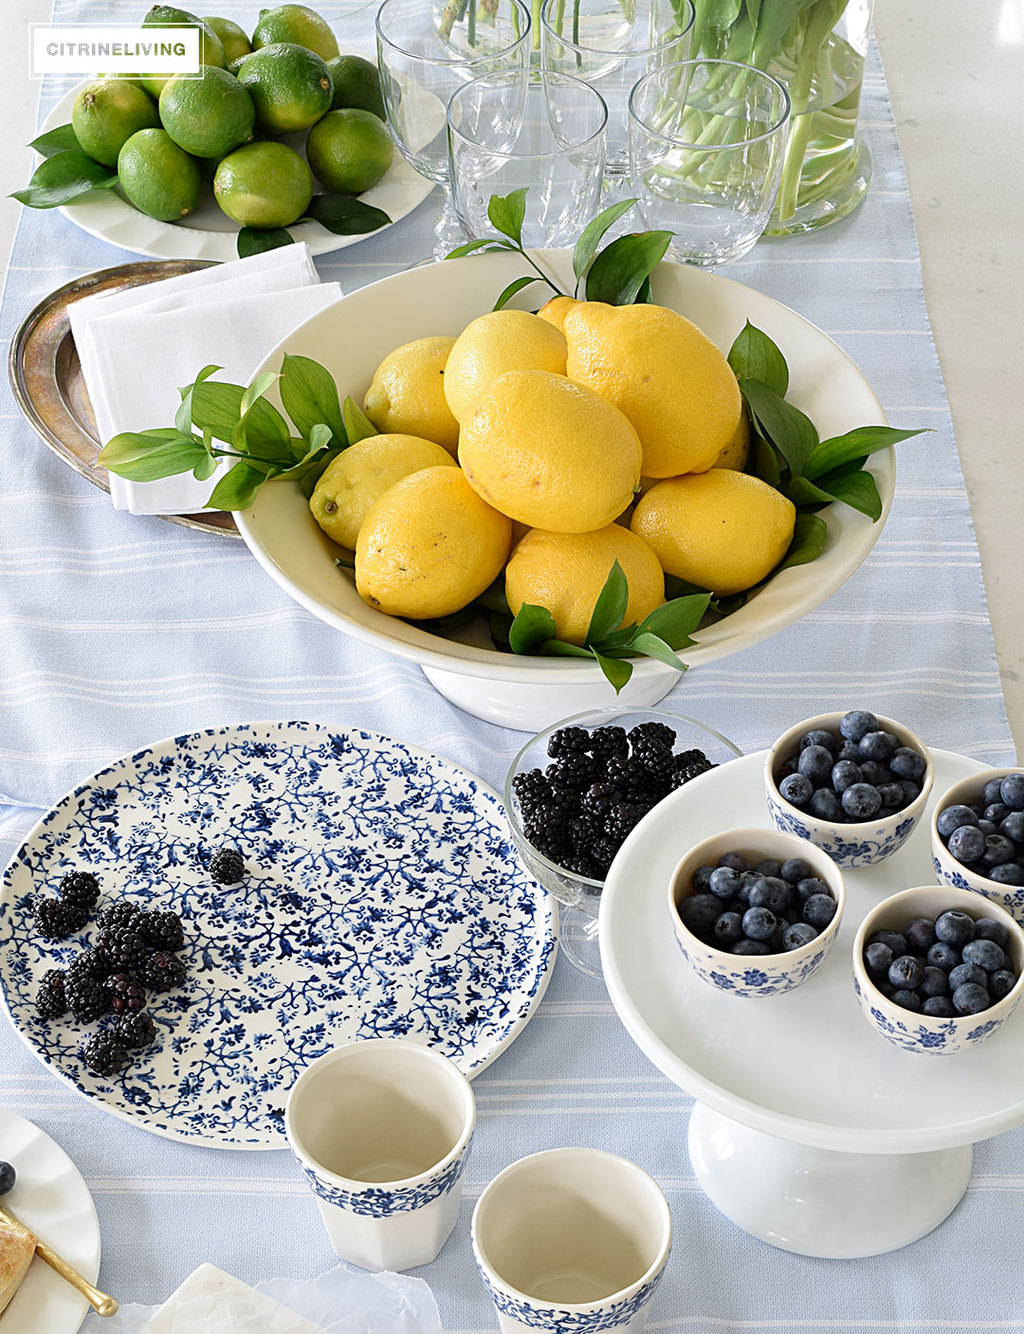 Create a welcoming tablescape of blue and white accented with fresh flowers, lemons and limes.